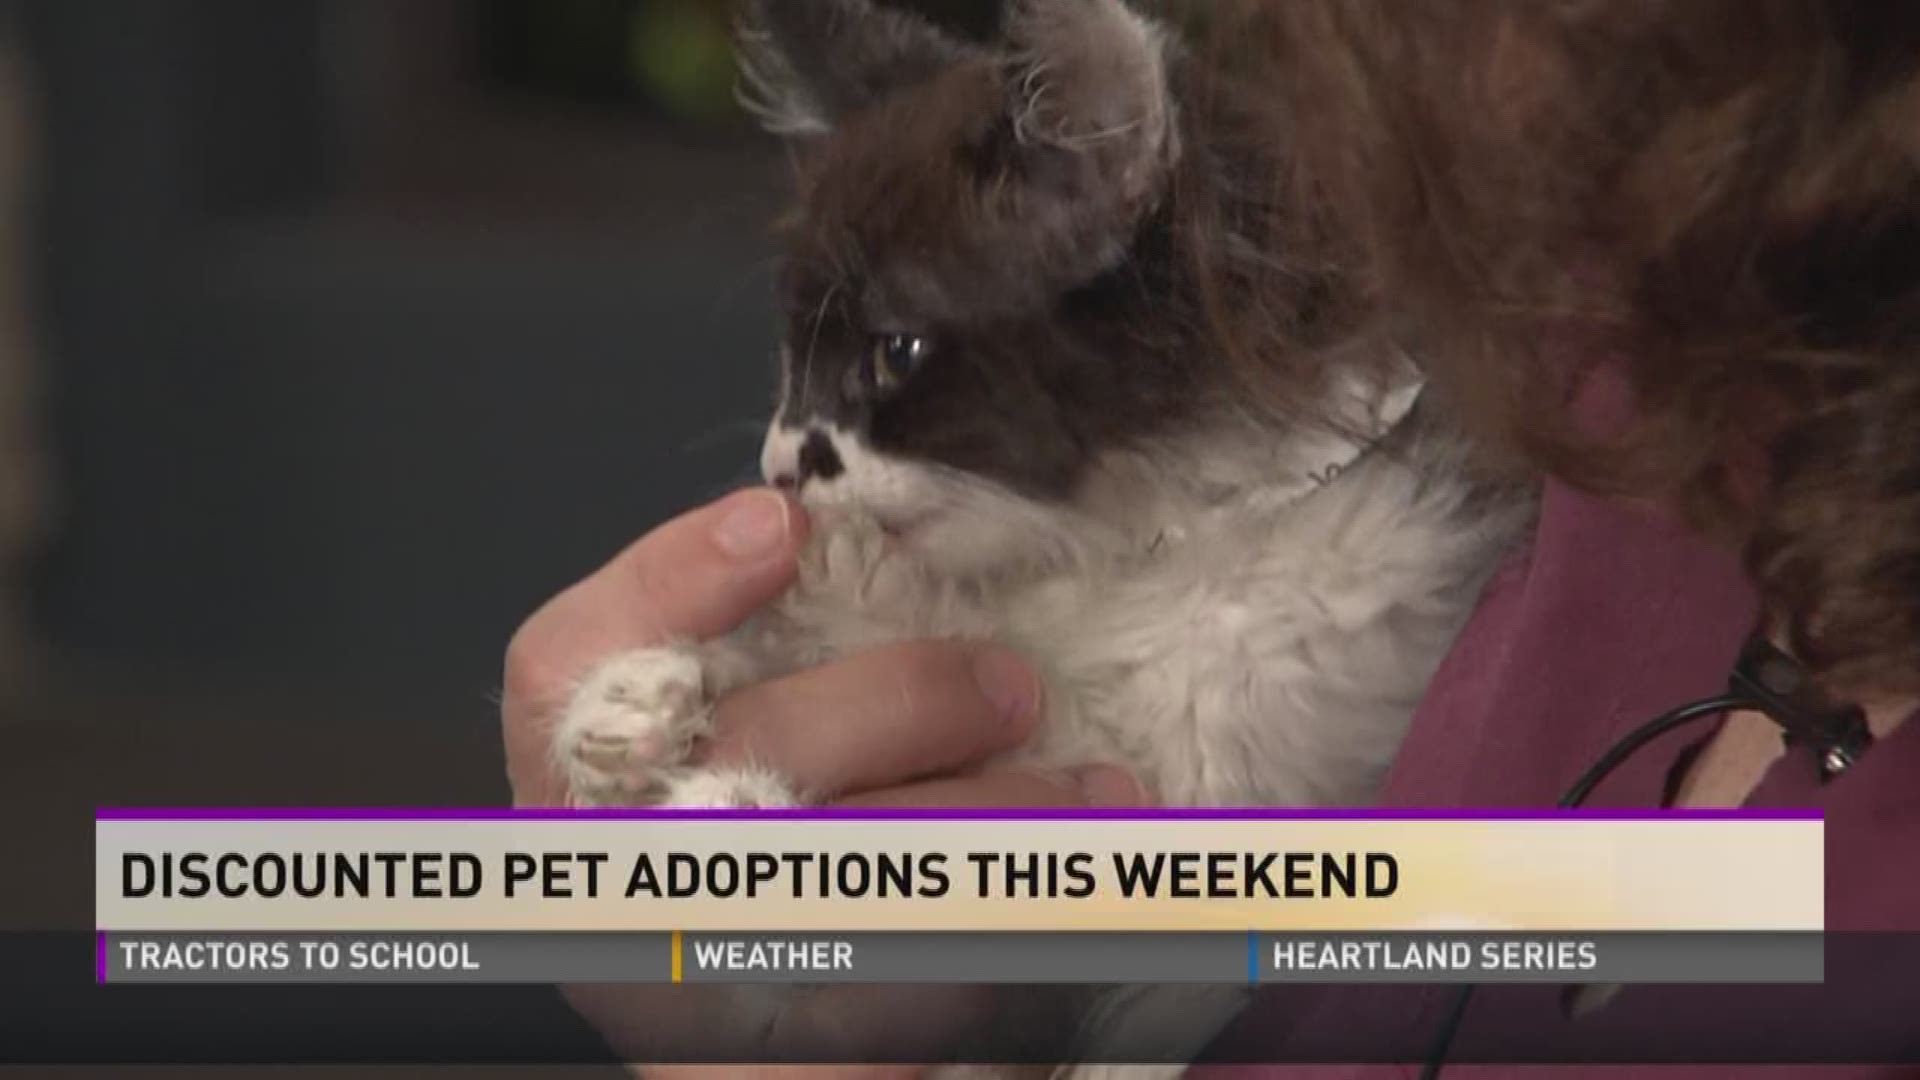 Dr. Lisa Chassy of Young-Williams brings by the pet of the week (Wink, cat). She also discusses discounted adoptions.